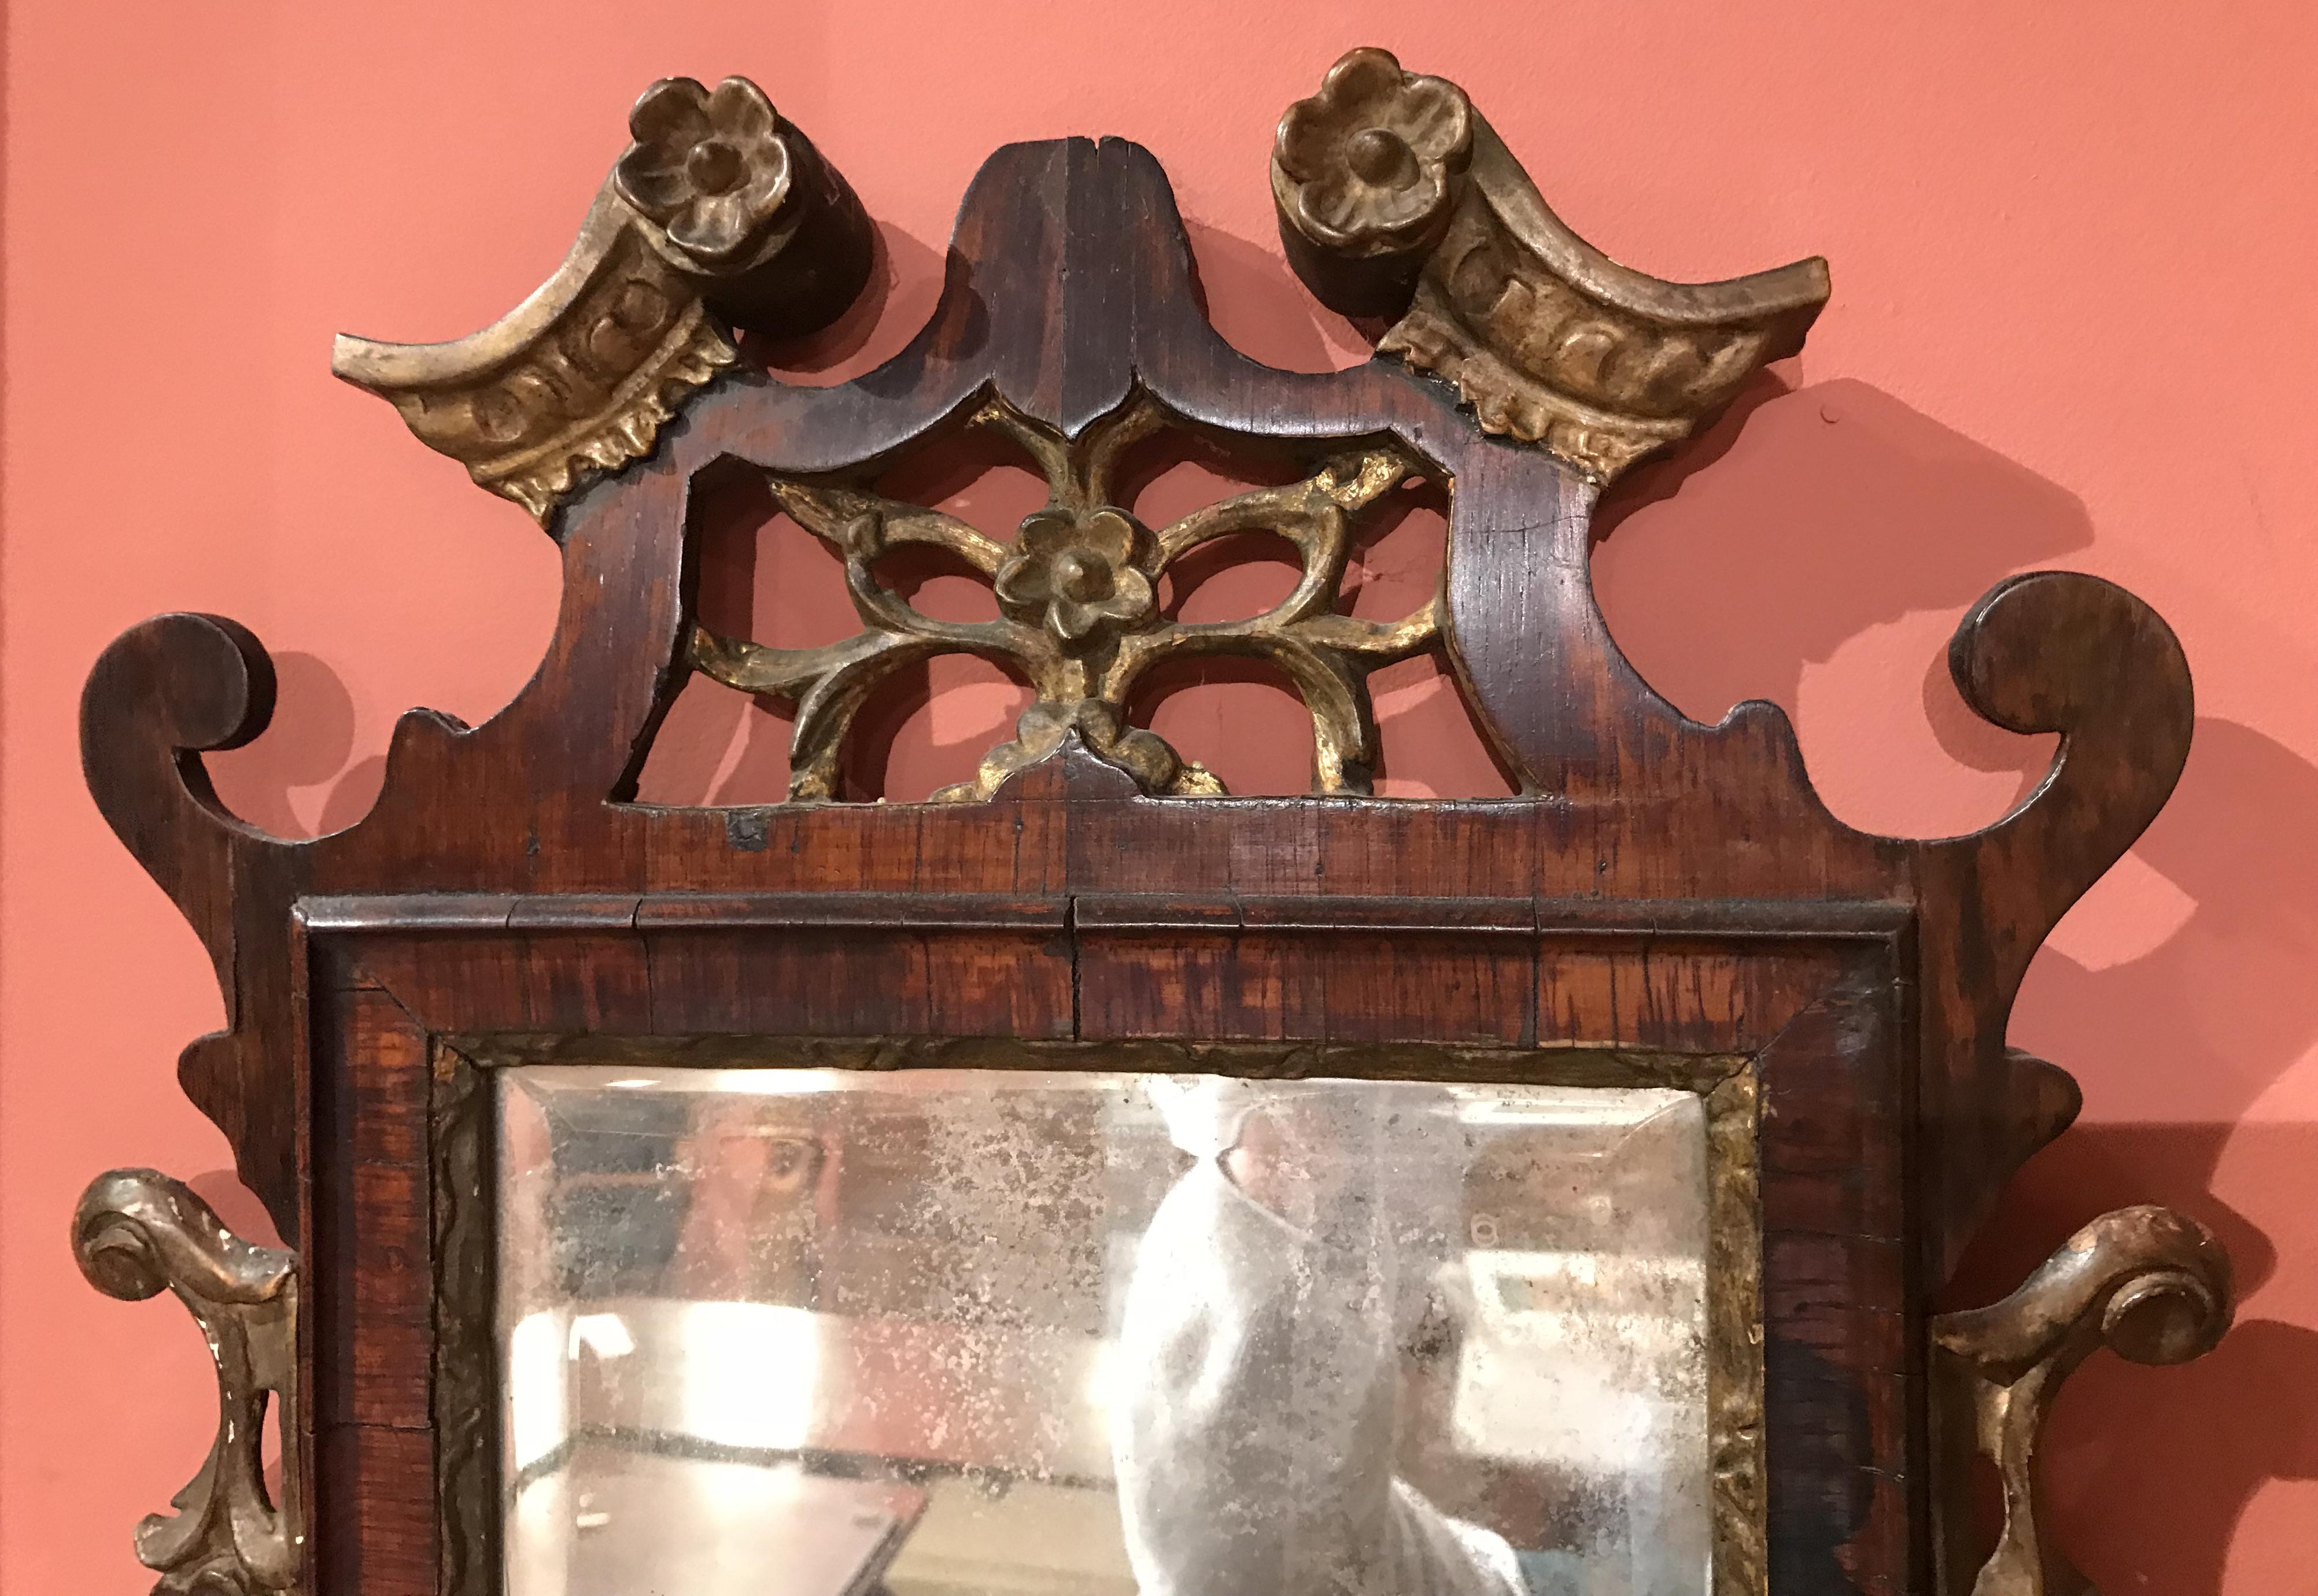 A fine diminutive rosewood mirror with carved reticulated crest and borders accented with gilt scrollwork and rosettes. Bevelled looking glass. Probably Northern European in origin, dating to the 18th century. Good overall condition, with minor